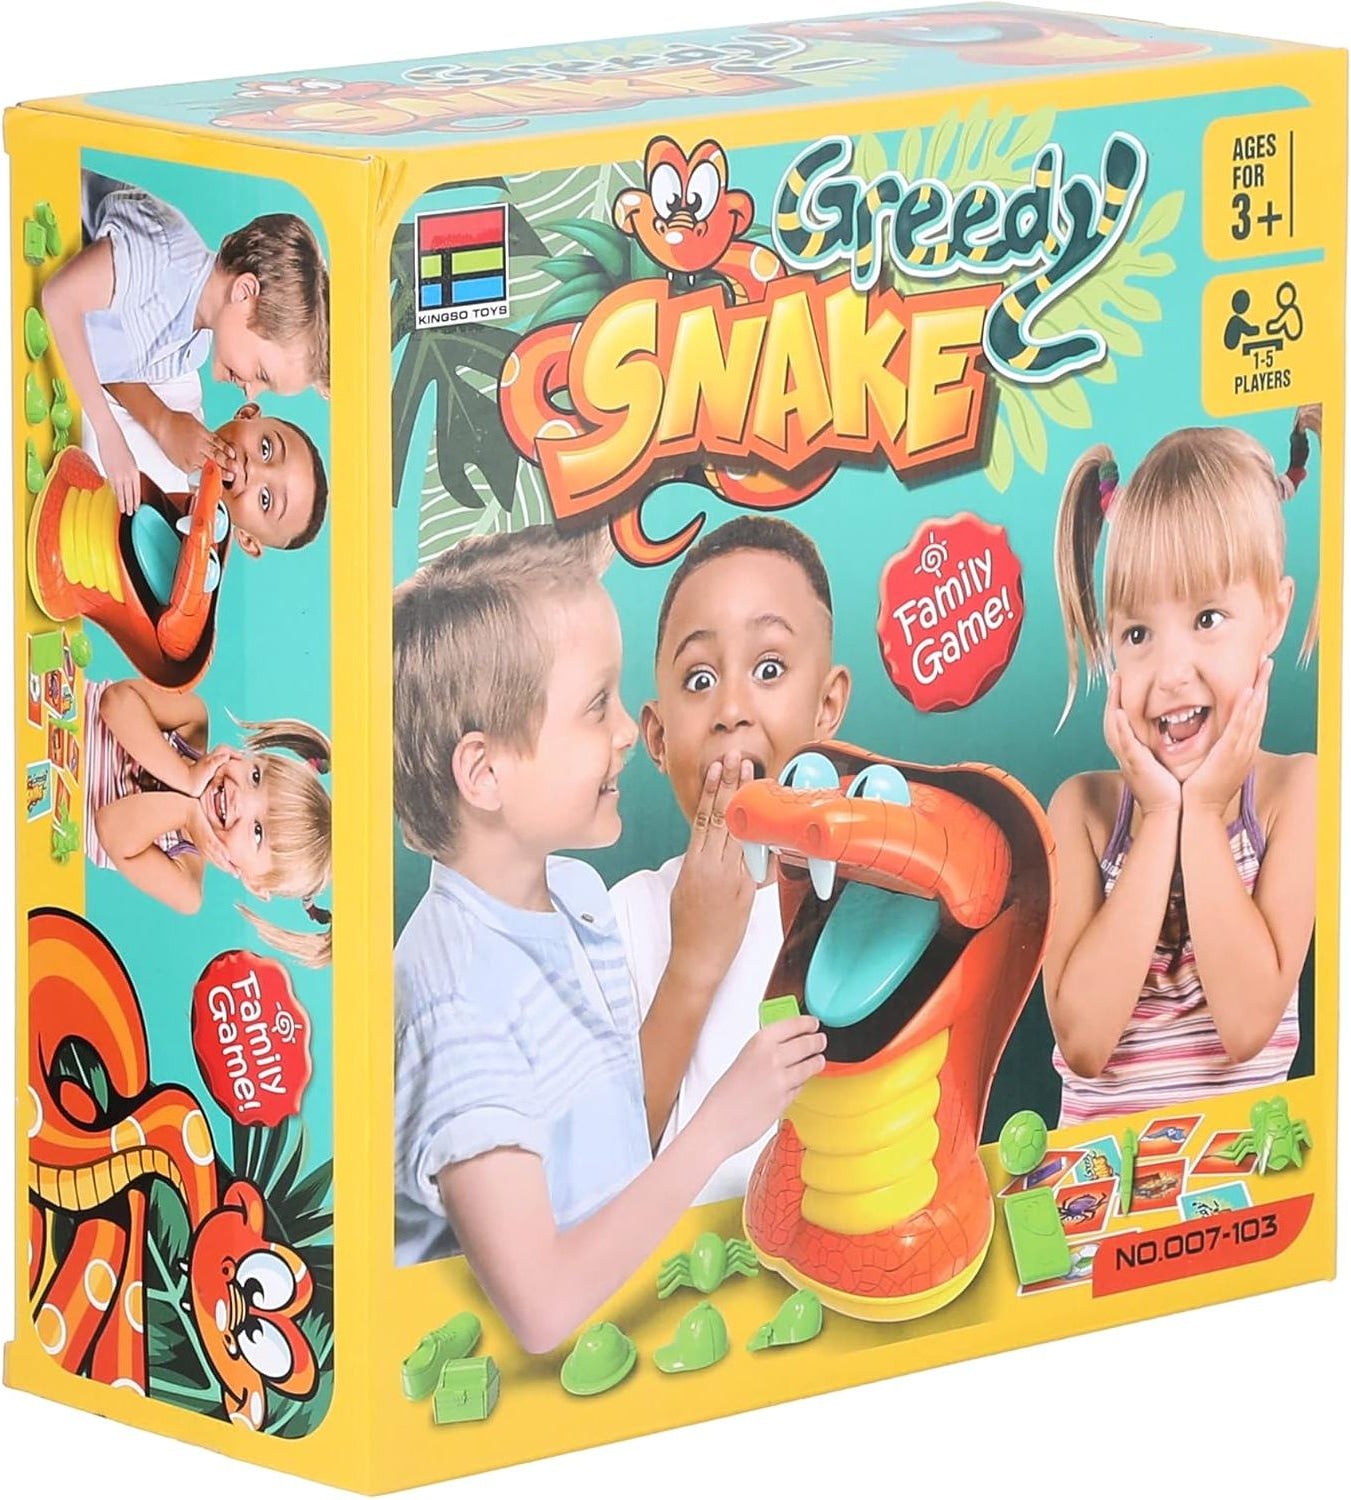 Greedy Snake Game For kids and their family